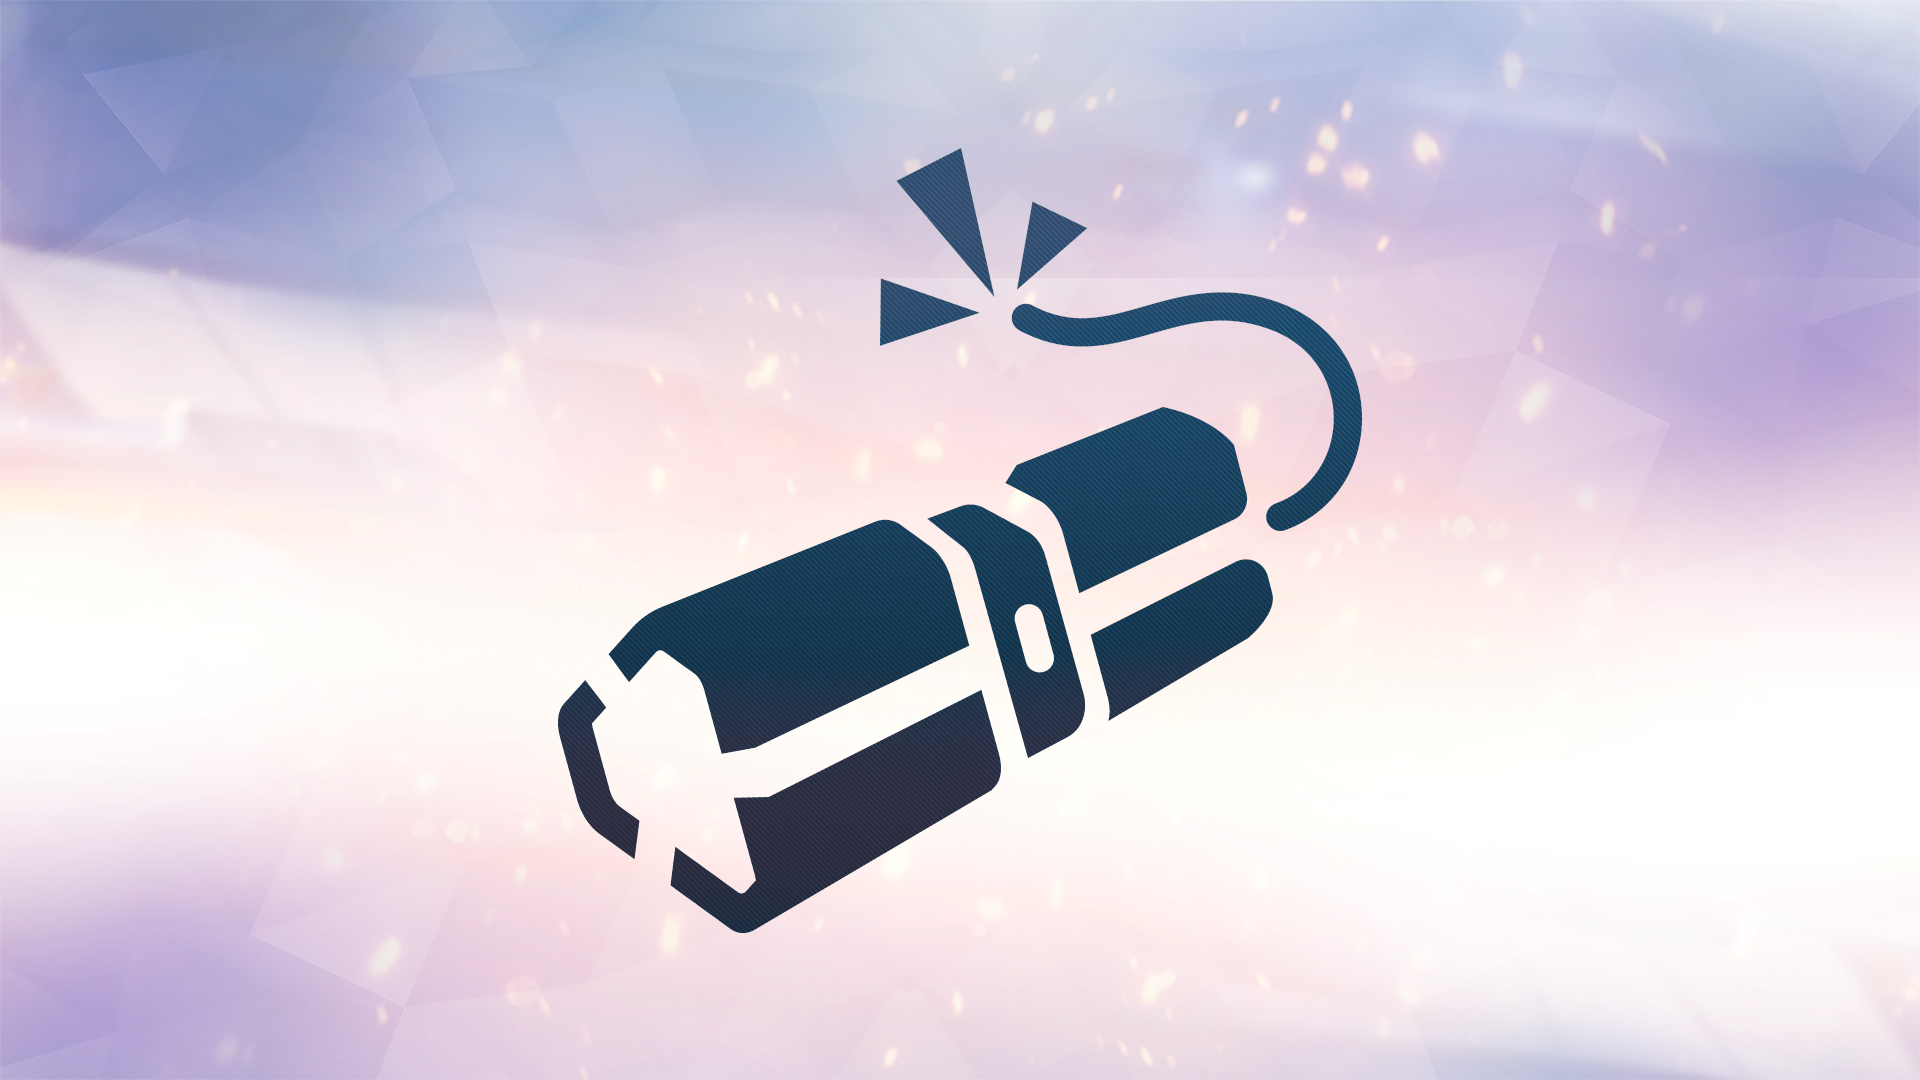 Icon for Short Fuse